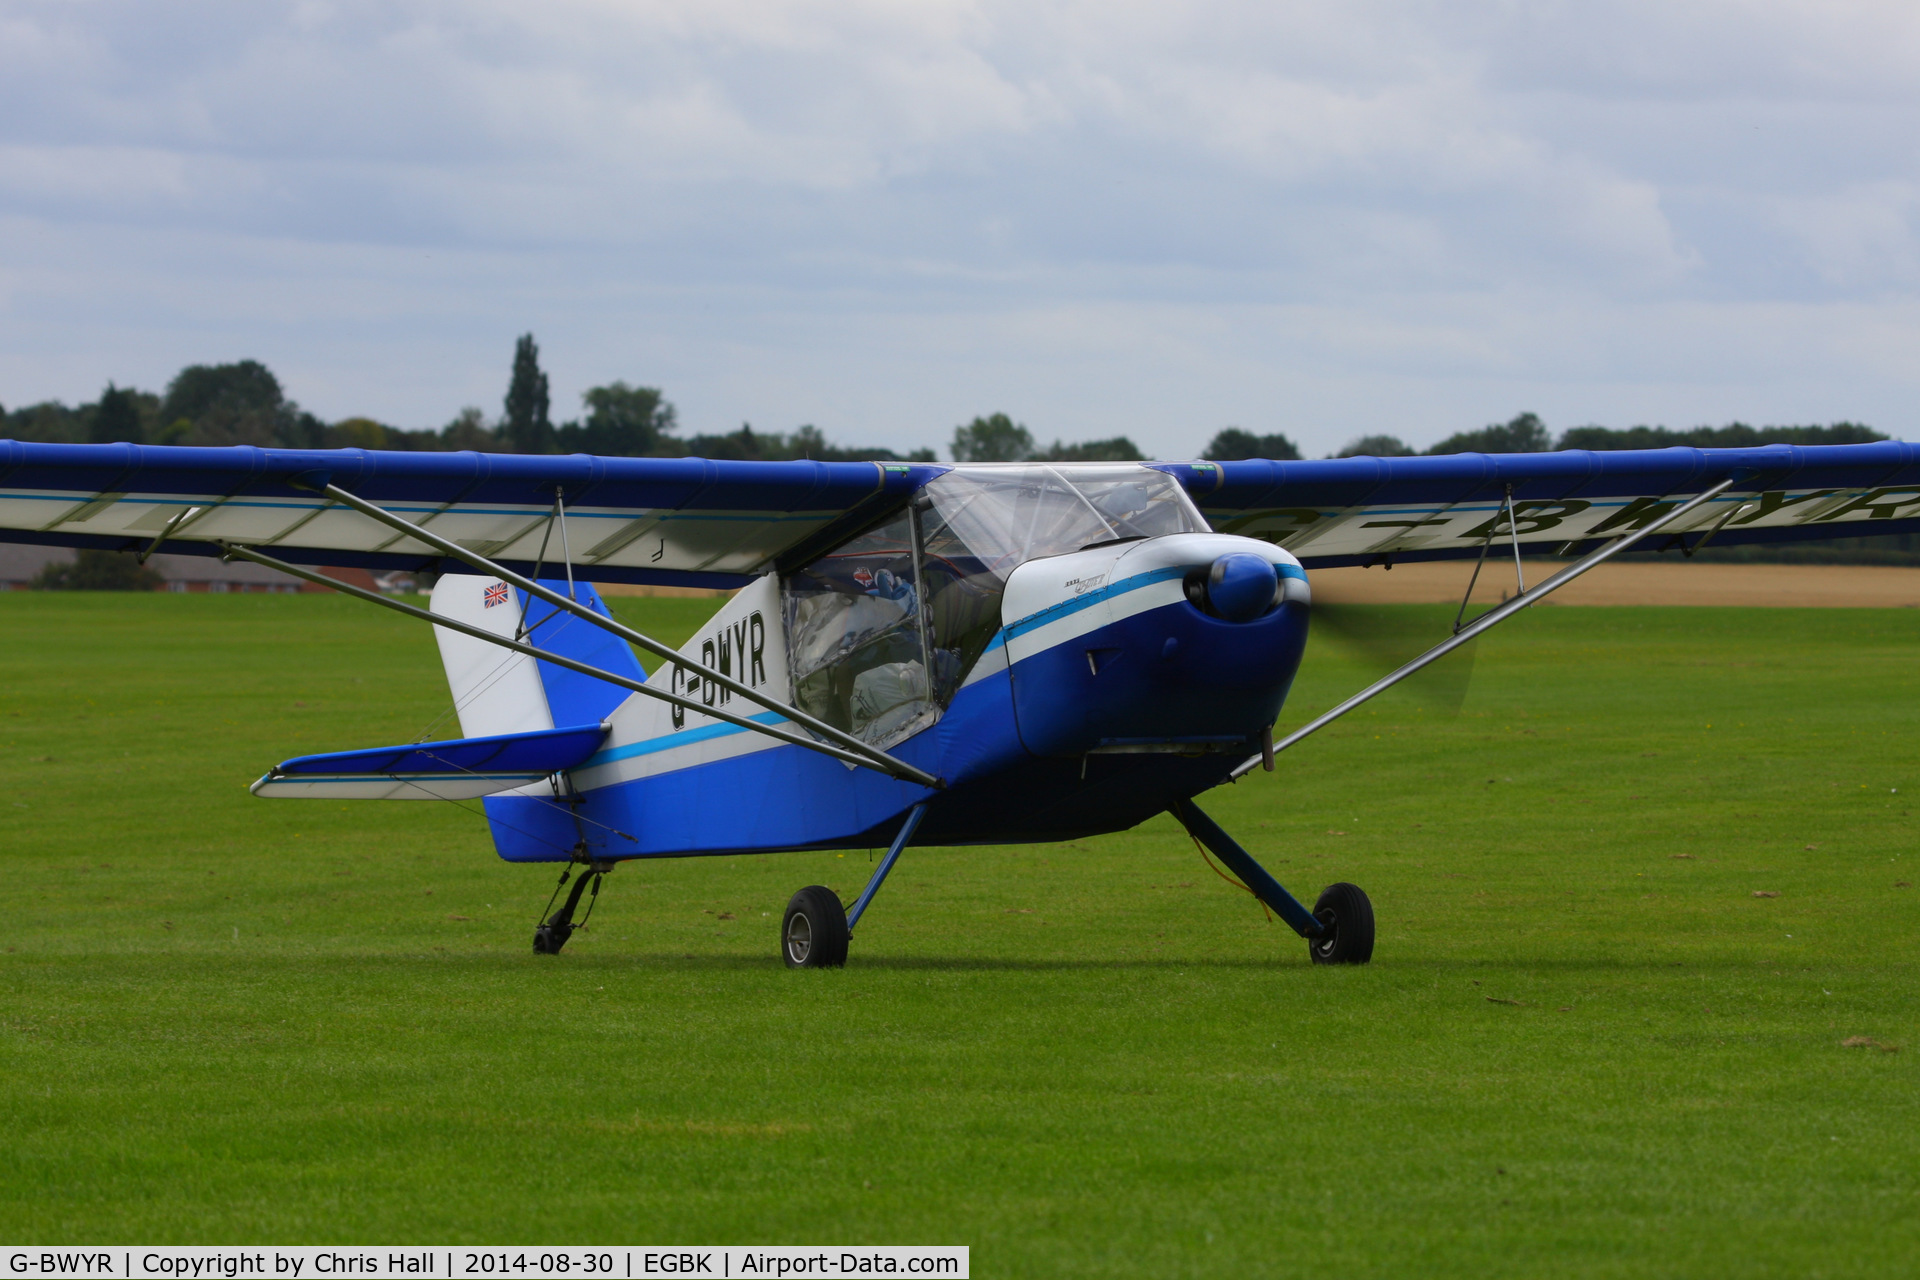 G-BWYR, 1996 Rans S-6-116 Coyote II C/N PFA 204A-13058, at the LAA Rally 2014, Sywell